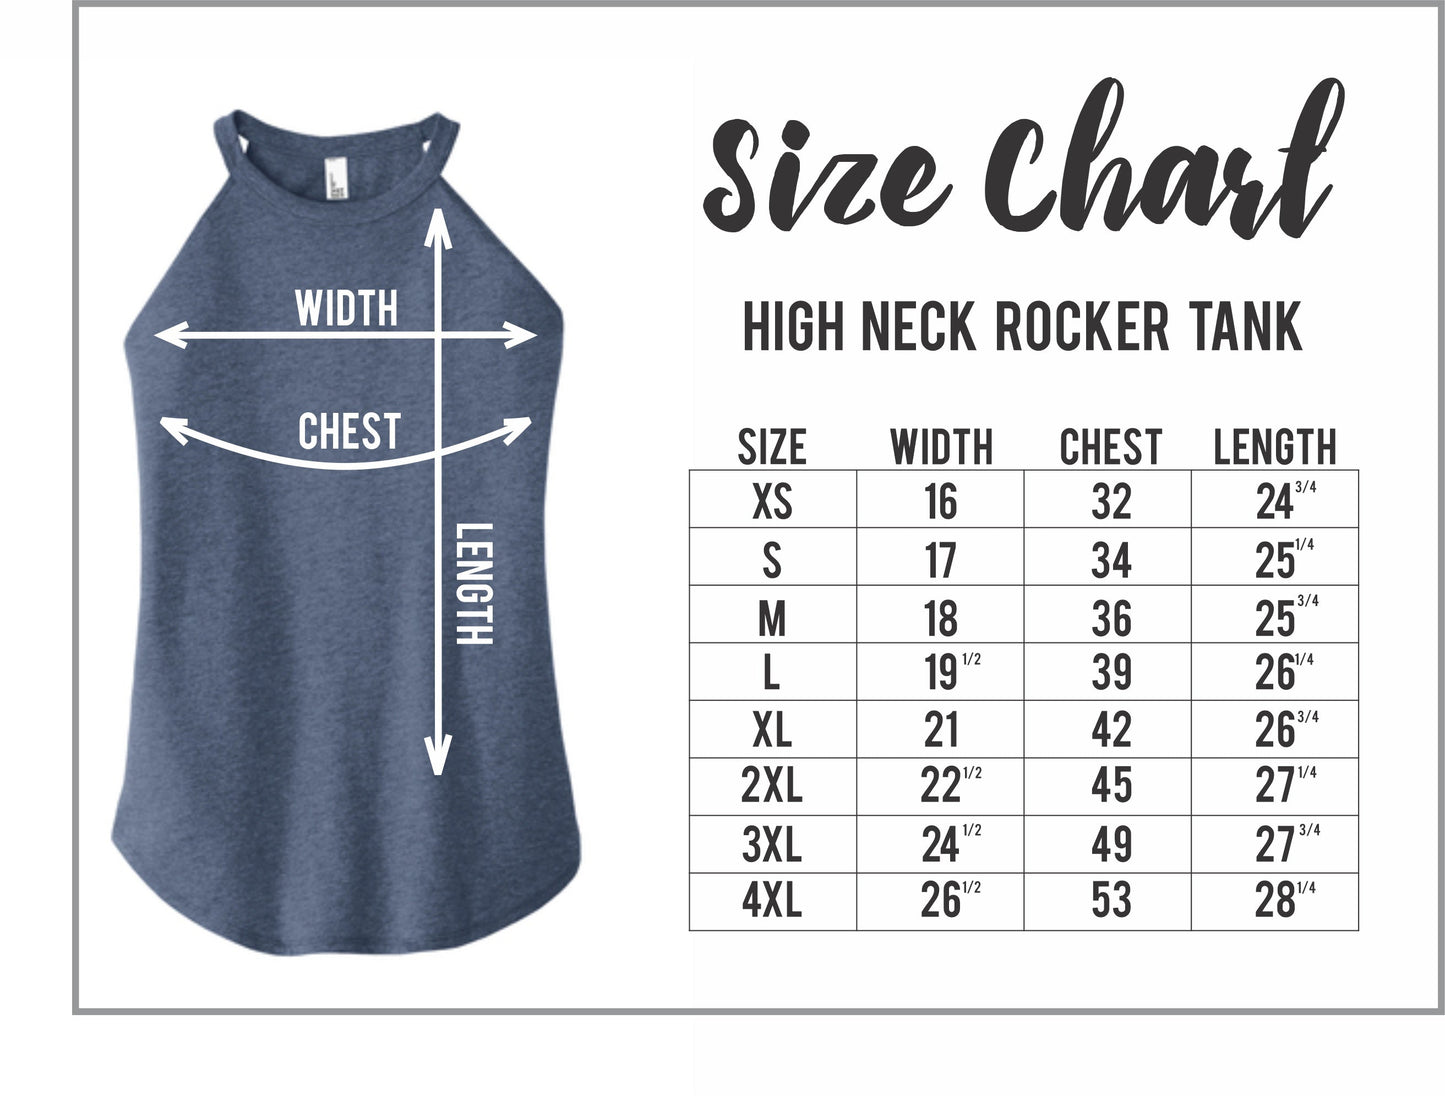 Therapy Session in Progress - High Neck Rocker Tank